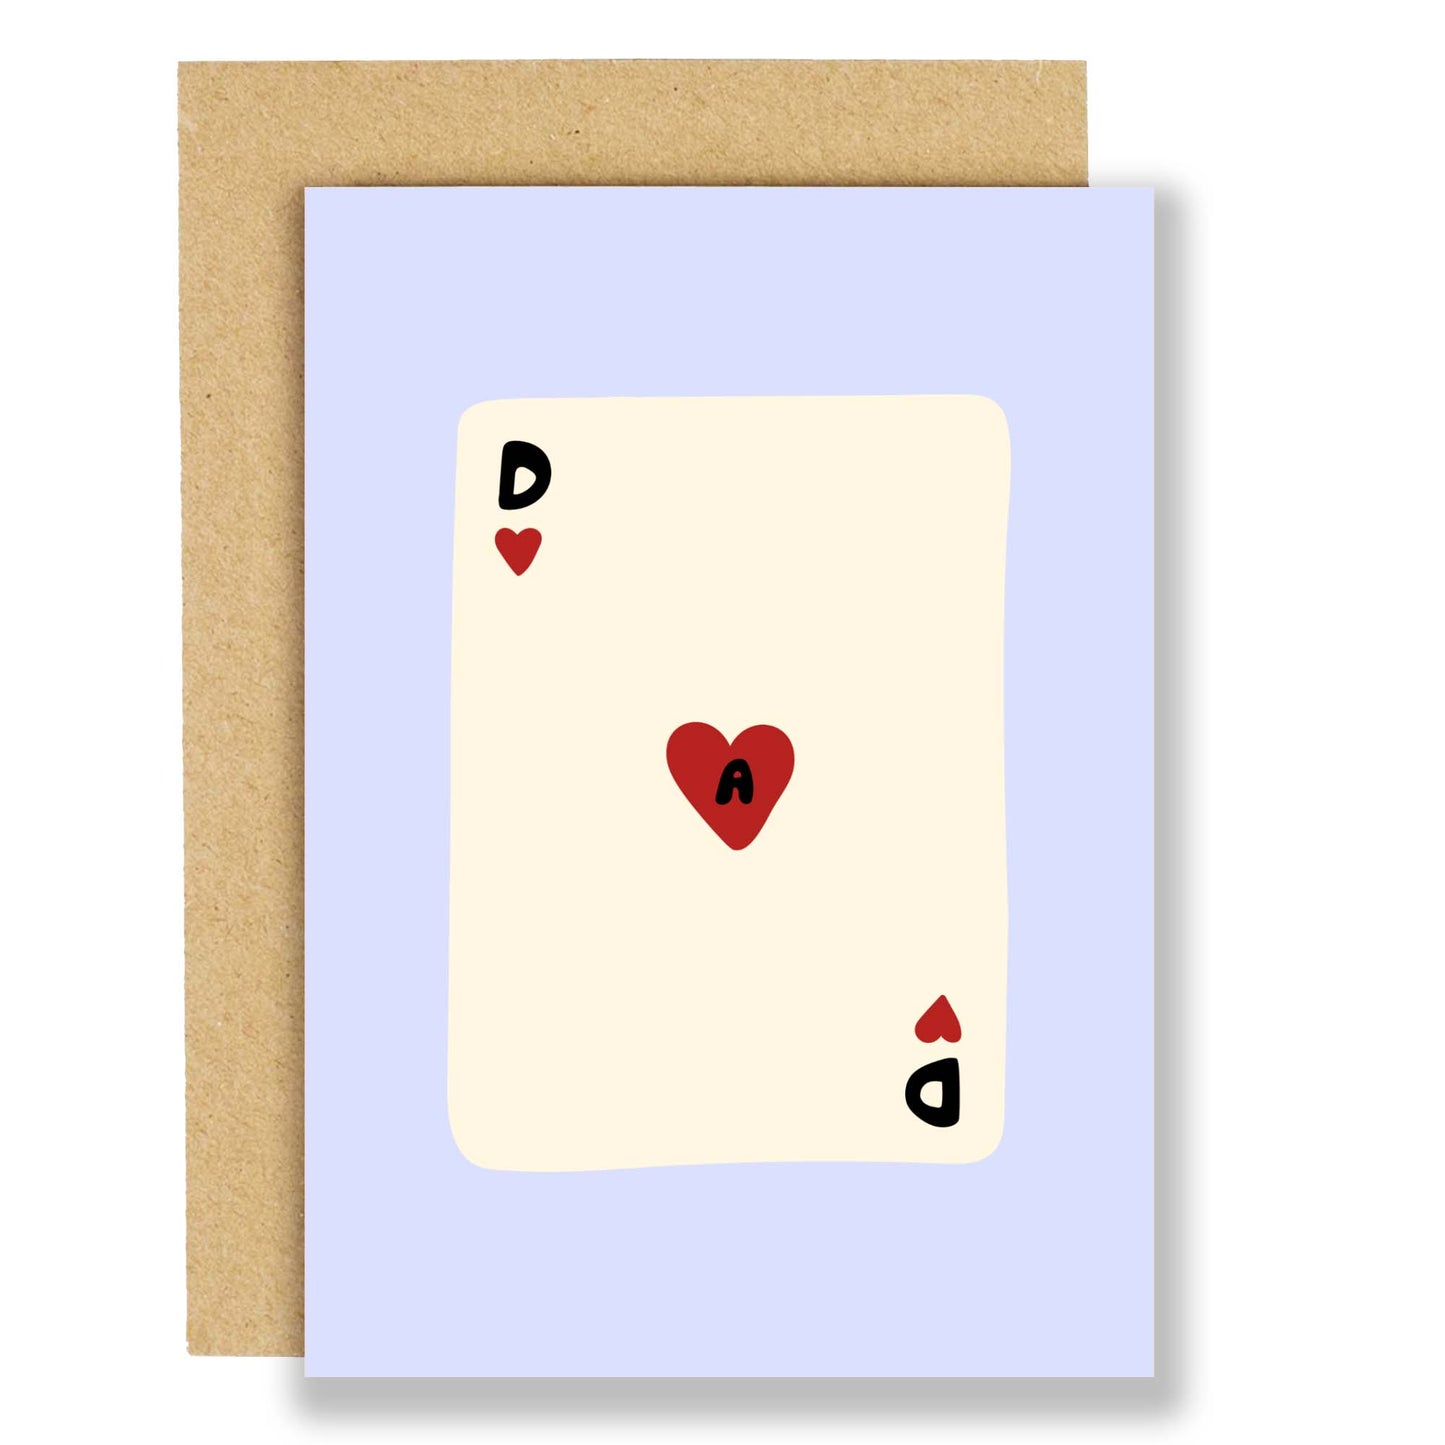 Fathers day greetings card UK